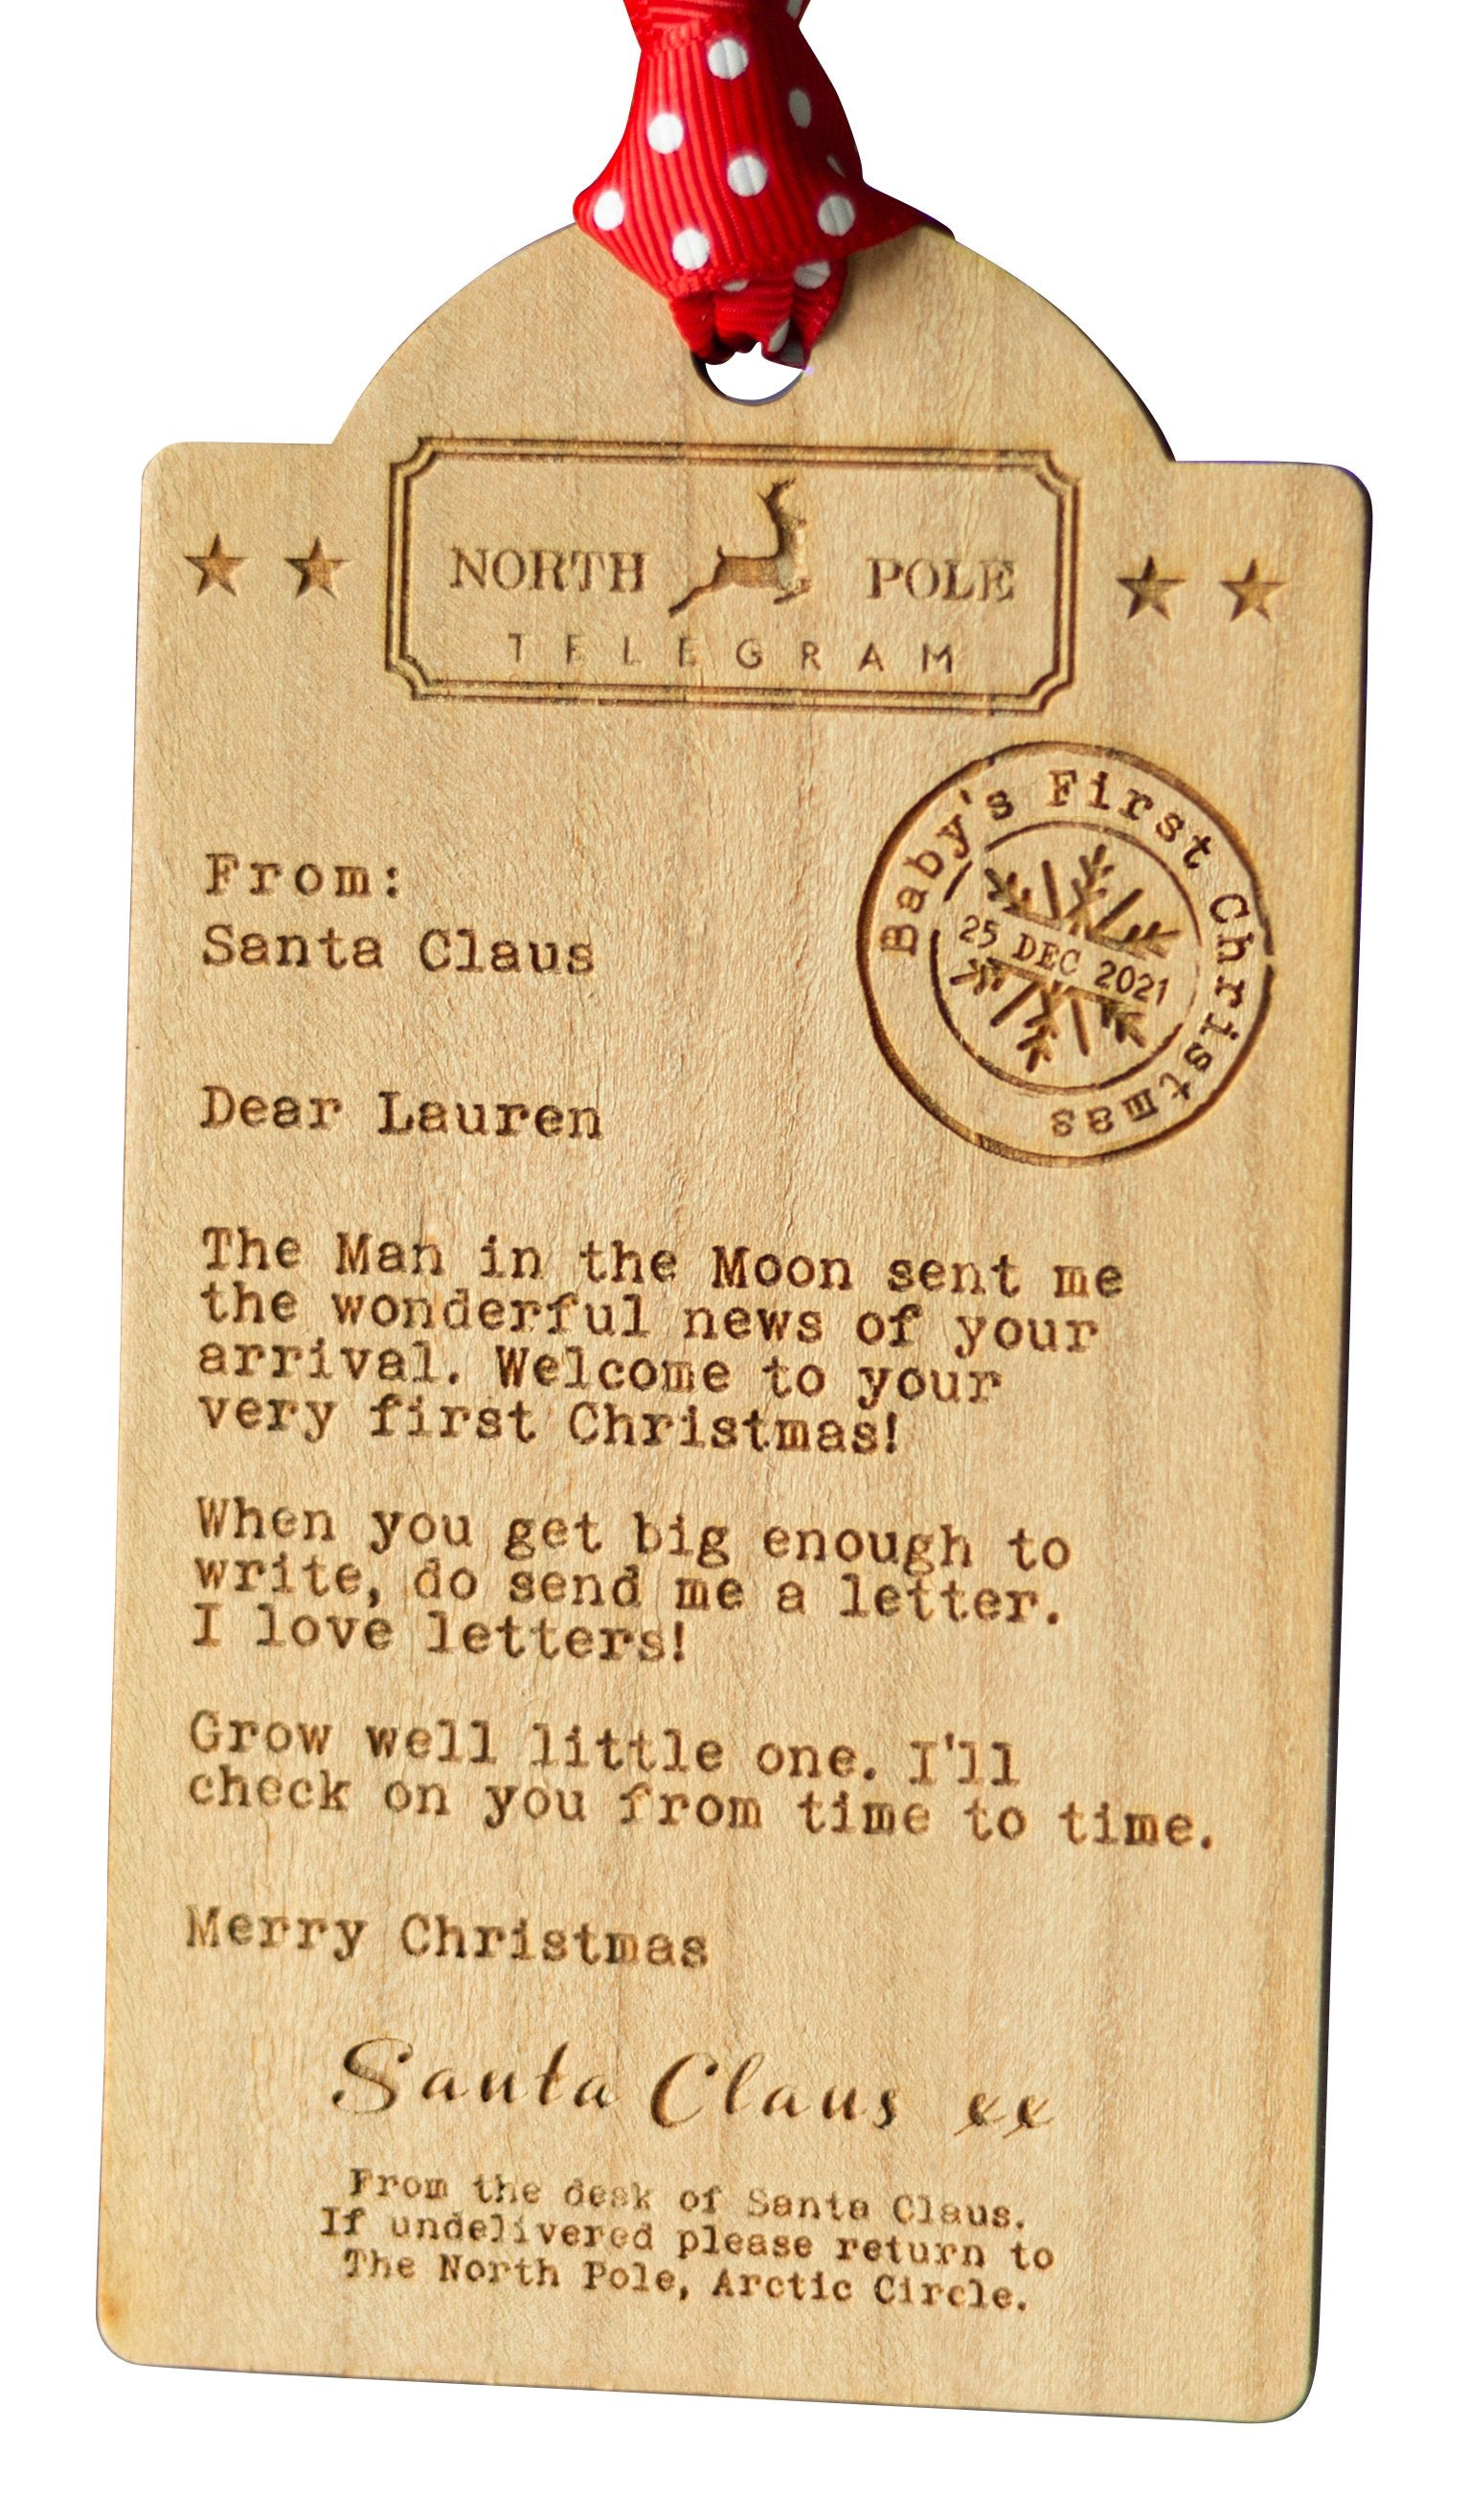 Cut out image of a luggage tag shaped Wooden decoration engraved with a typed message from Santa Claus 